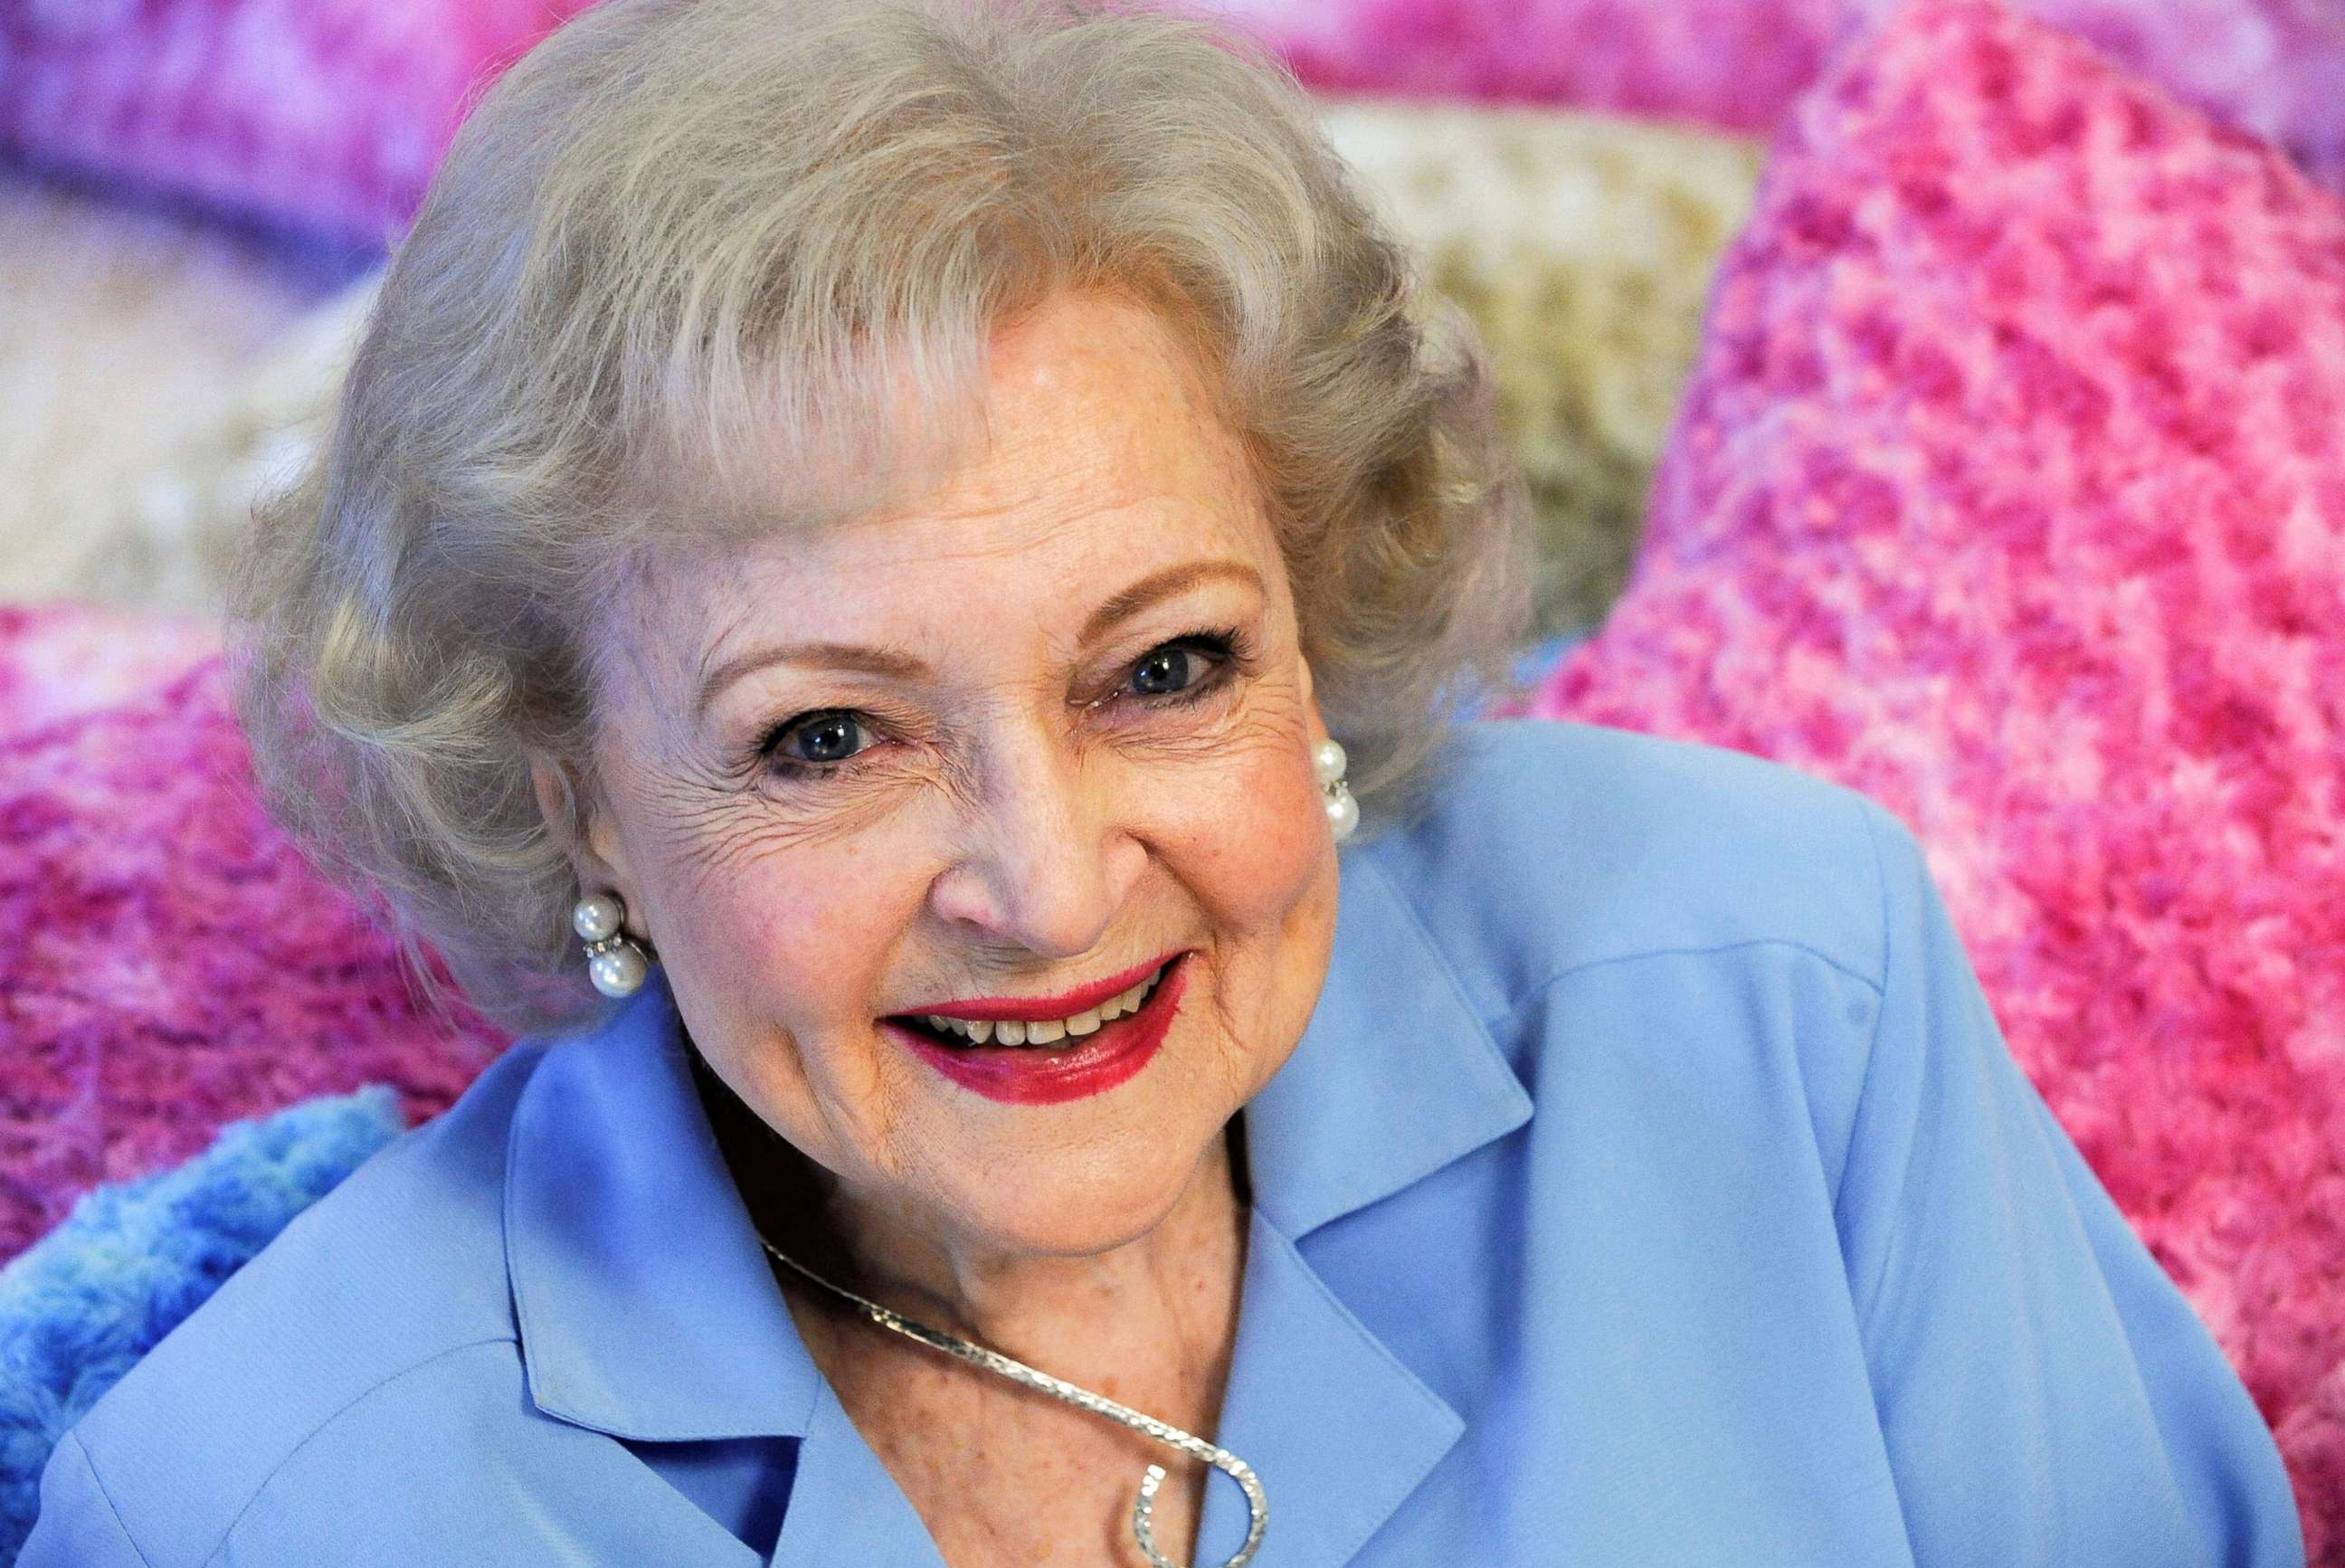 PHOTO: Actress Betty White poses for a portrait in Los Angeles, May 26, 2010.